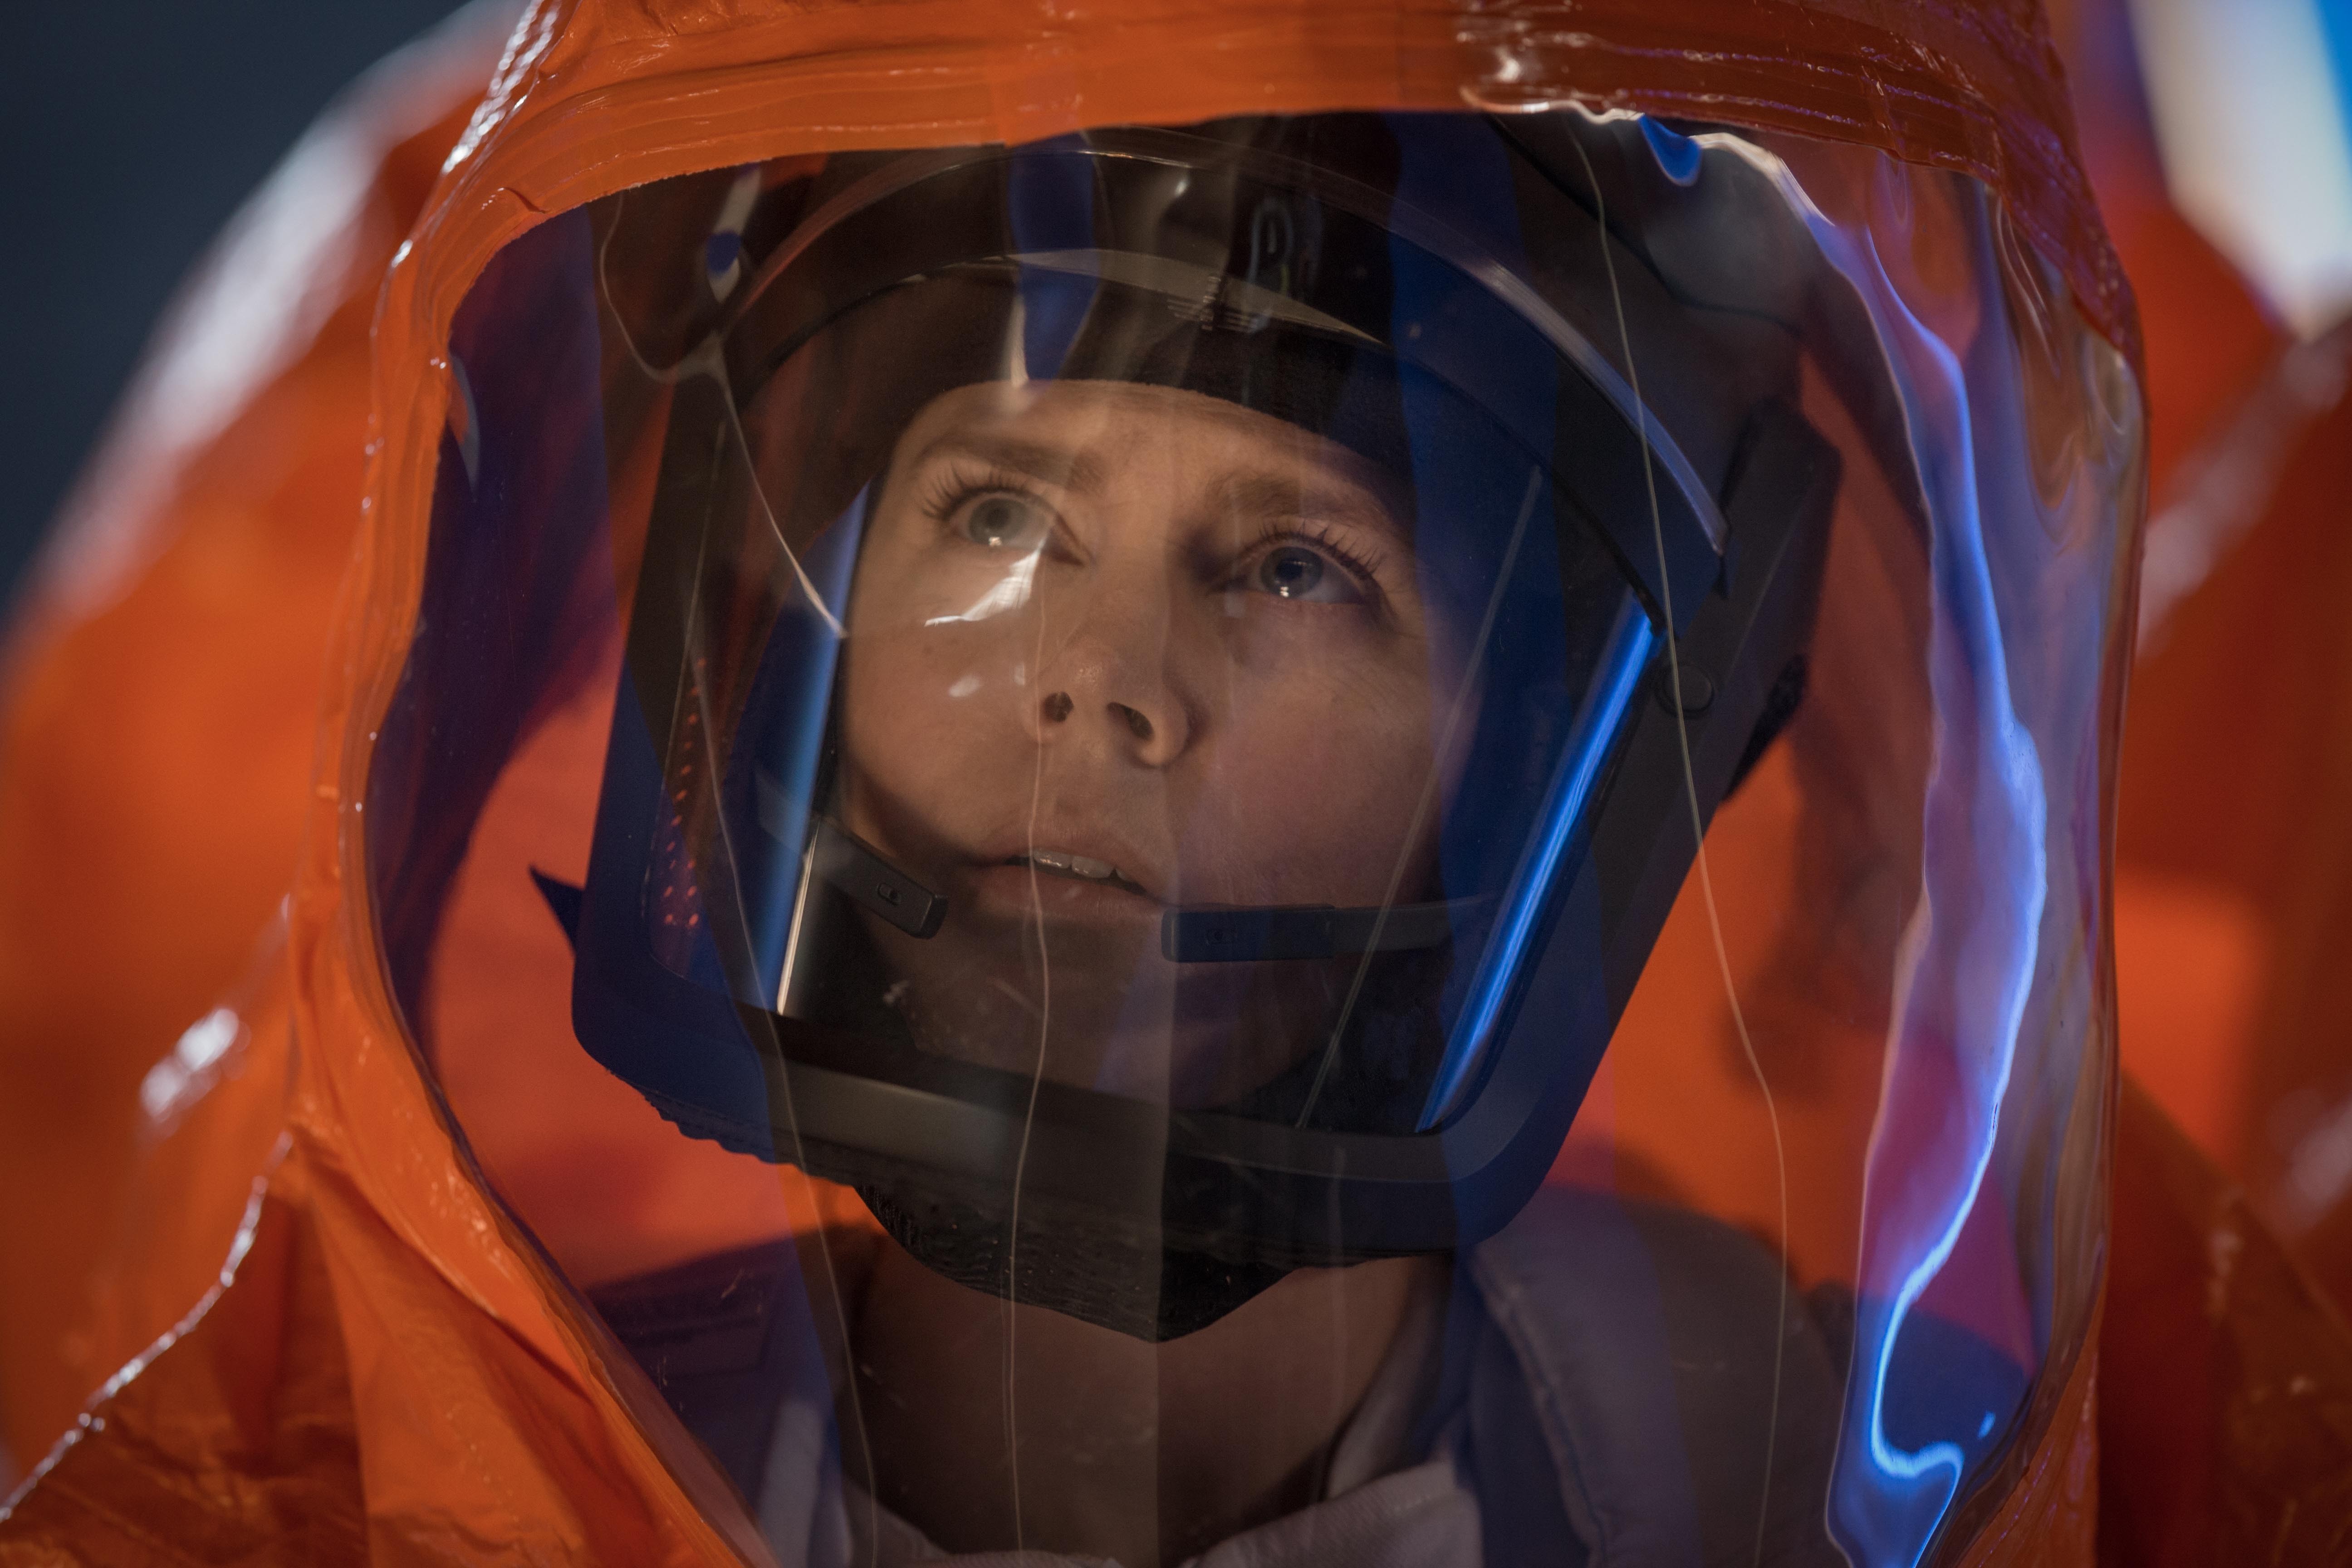 Arrival Amy Adams Women Actress Science Fiction Movies 5184x3456